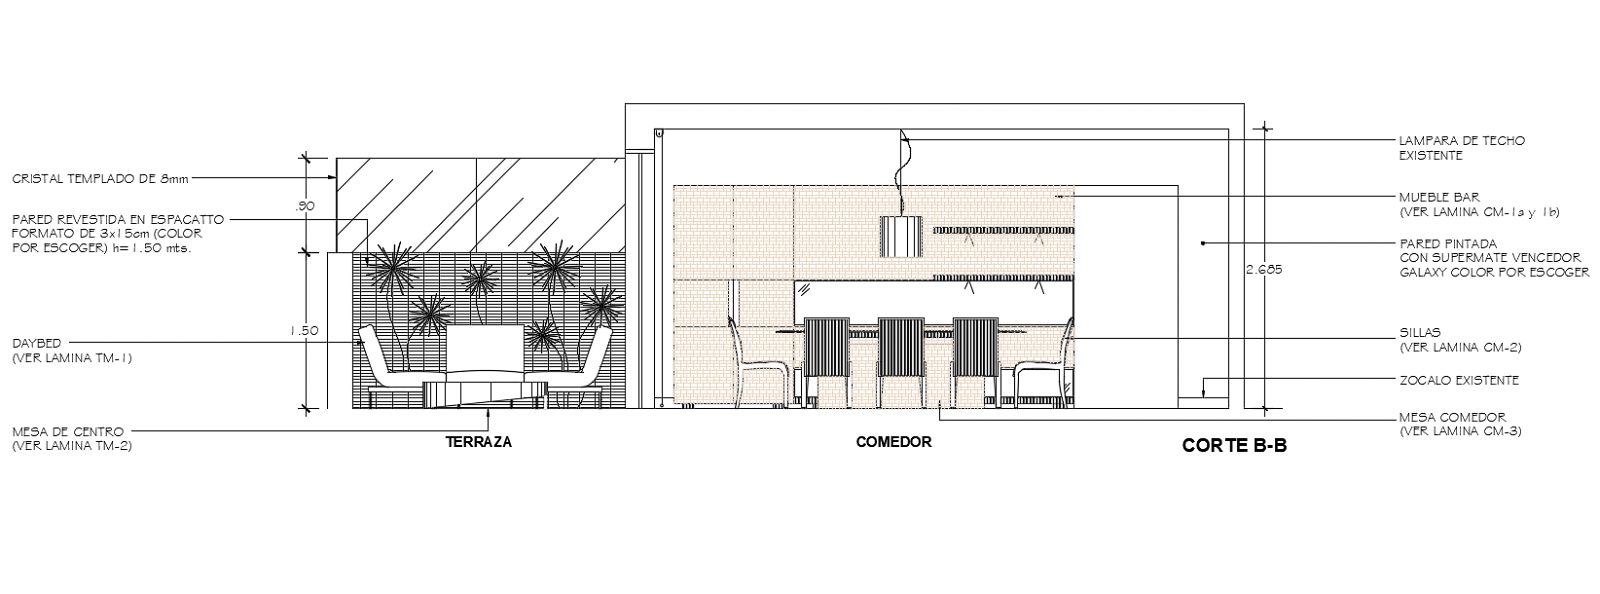 Office Interior Design Sectional Elevation AutoCAD Drawing ...